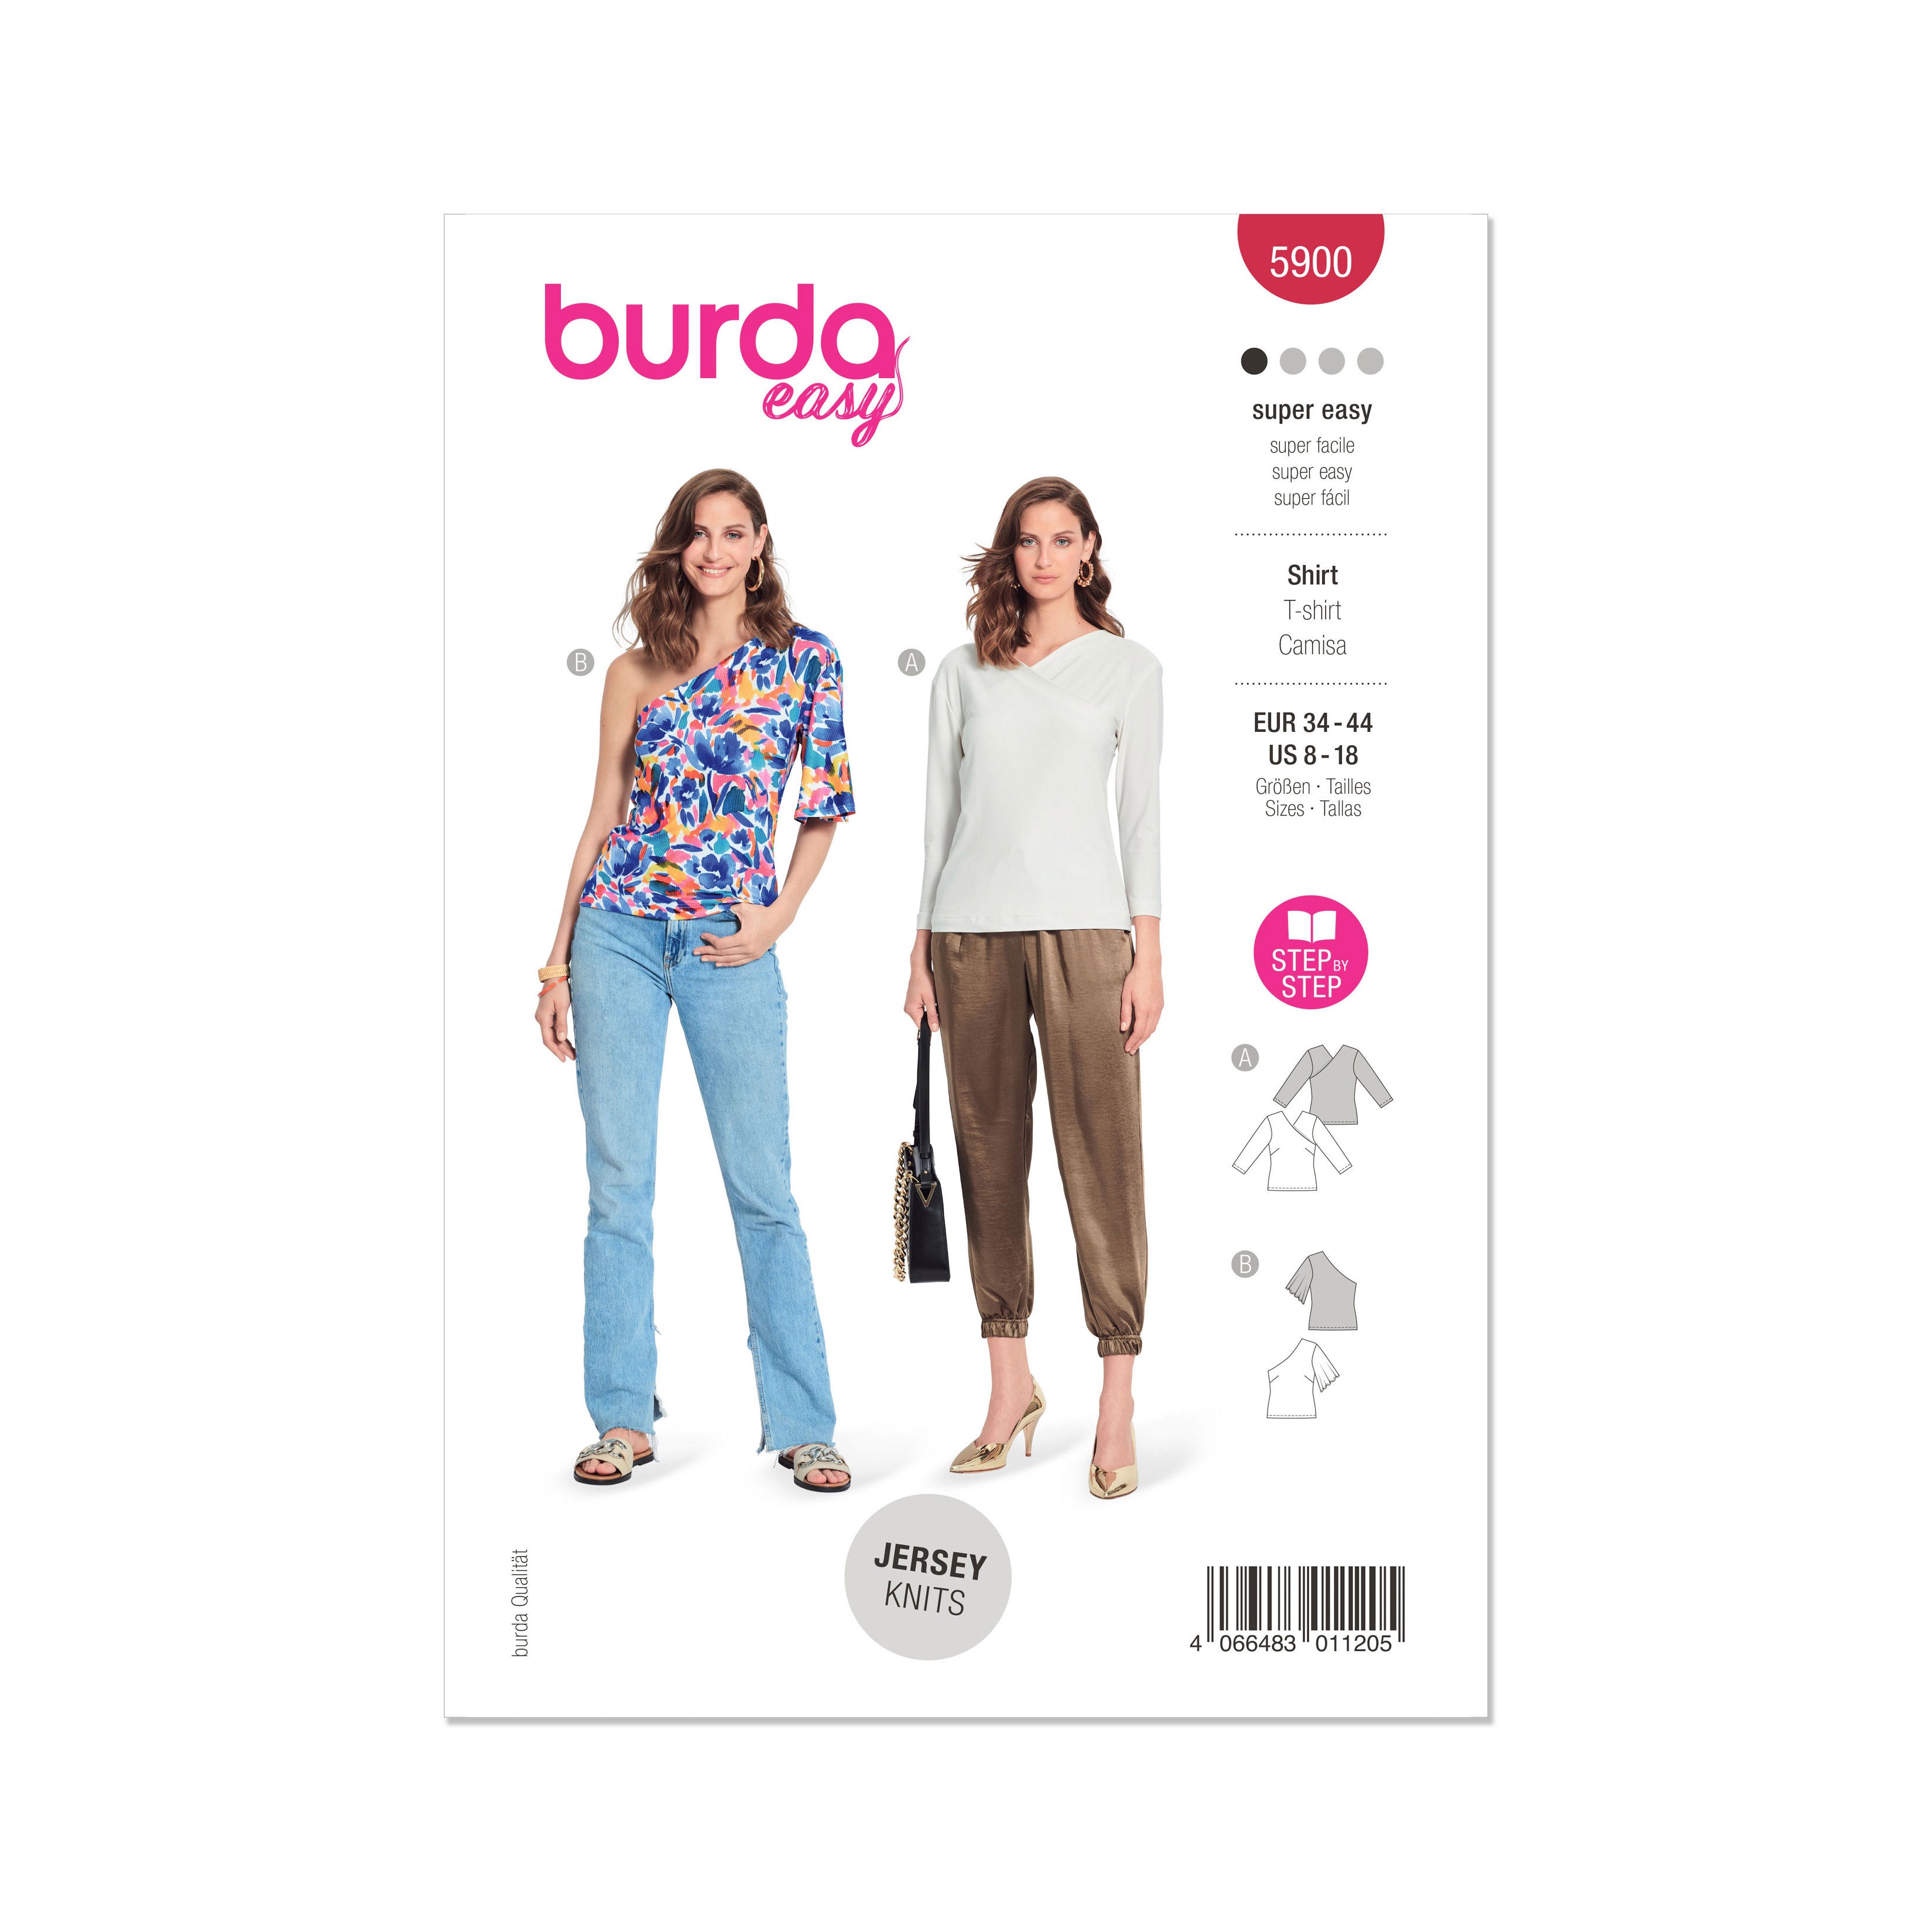 Burda Style Sewing Pattern 5900 Misses' Top from Jaycotts Sewing Supplies